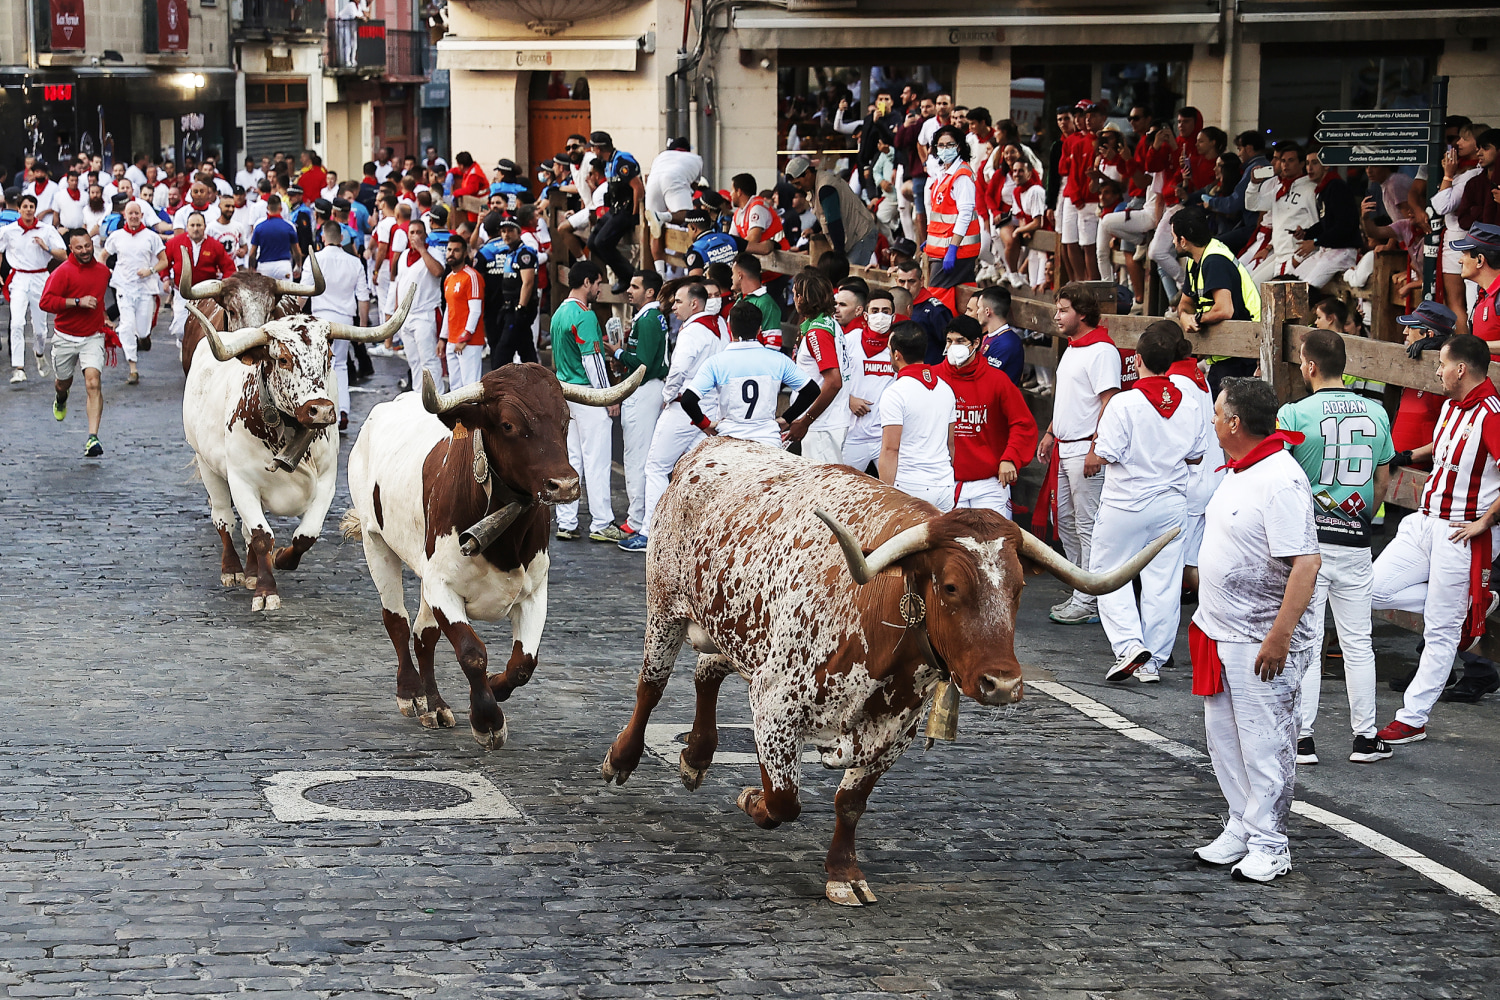 The course of the Running of the Bulls 